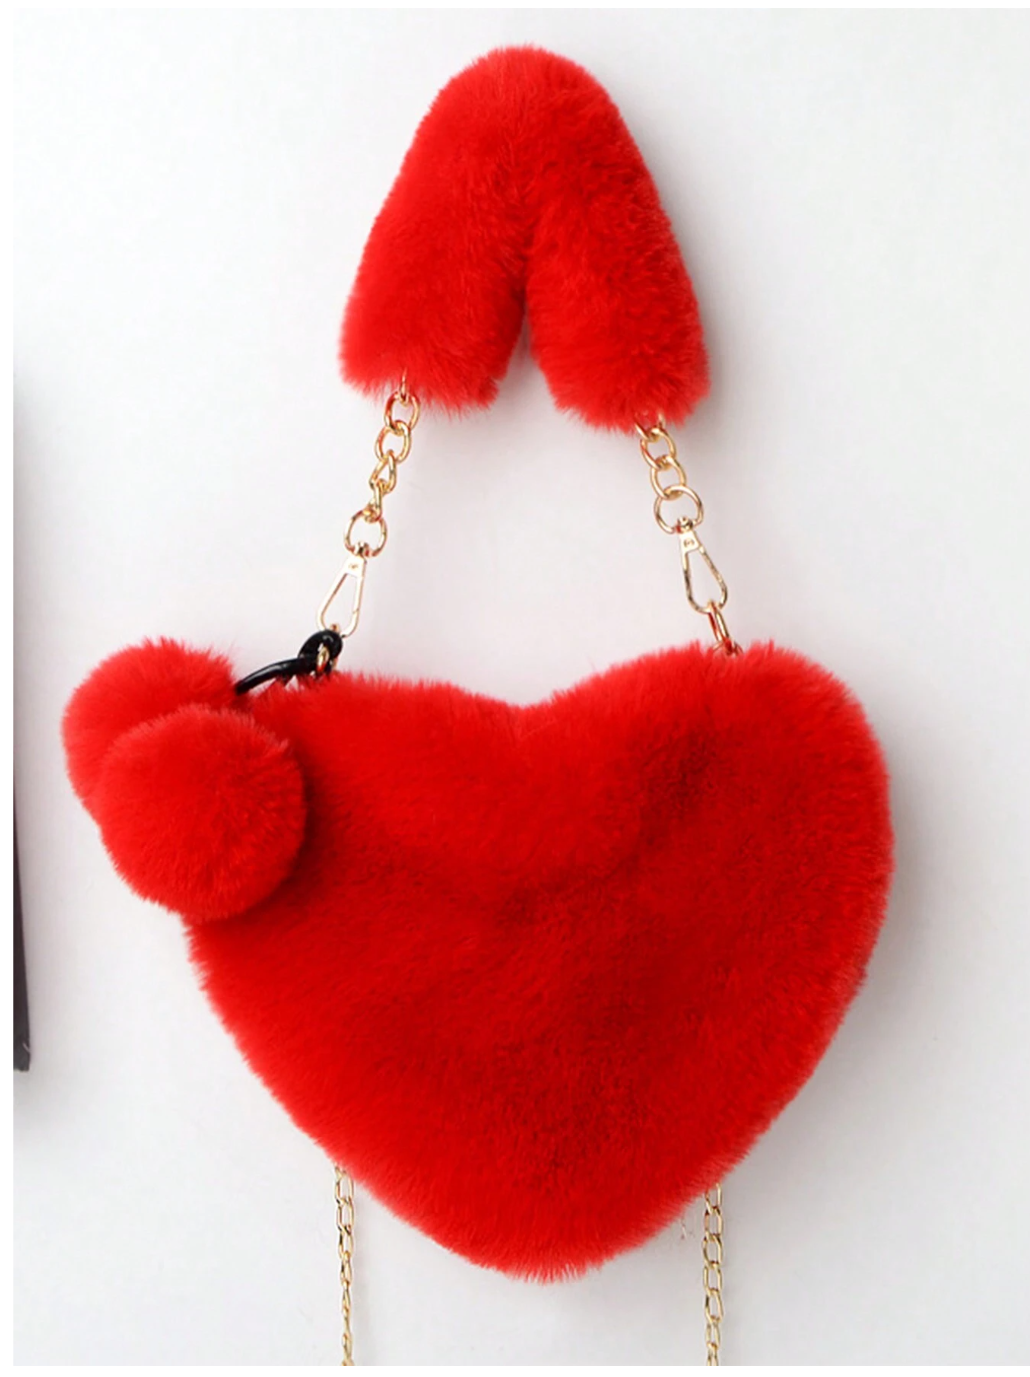 Love Wrapped in Fur: Heartfelt Elegance with the Furry Purse – The Ultimate Valentine's Day Gift for Her!